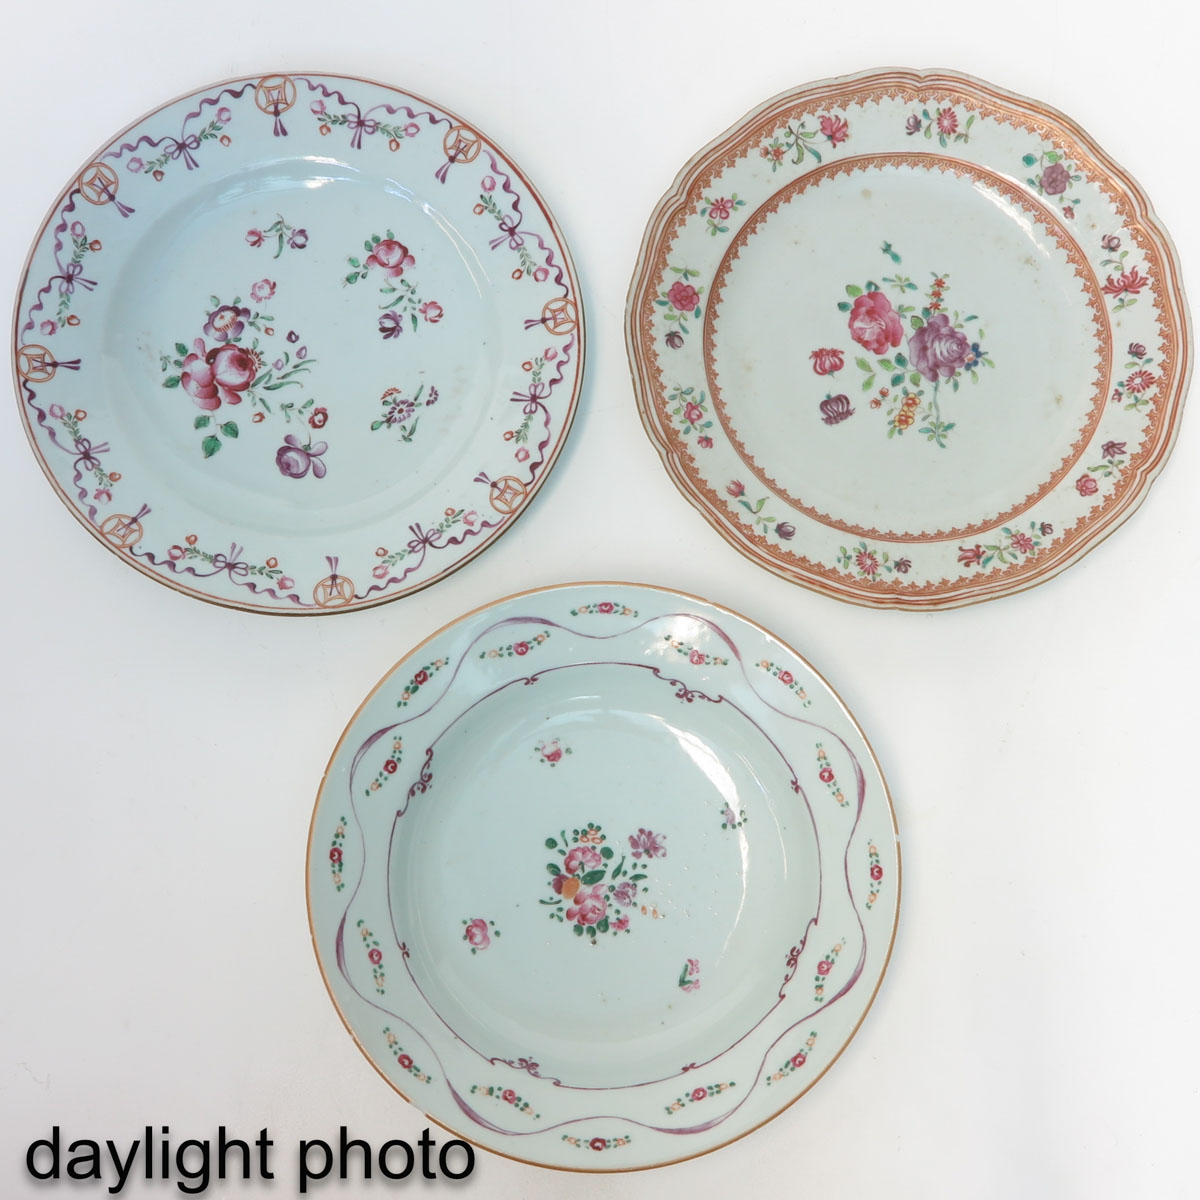 A Series of 10 Famille Rose Plates - Image 9 of 10